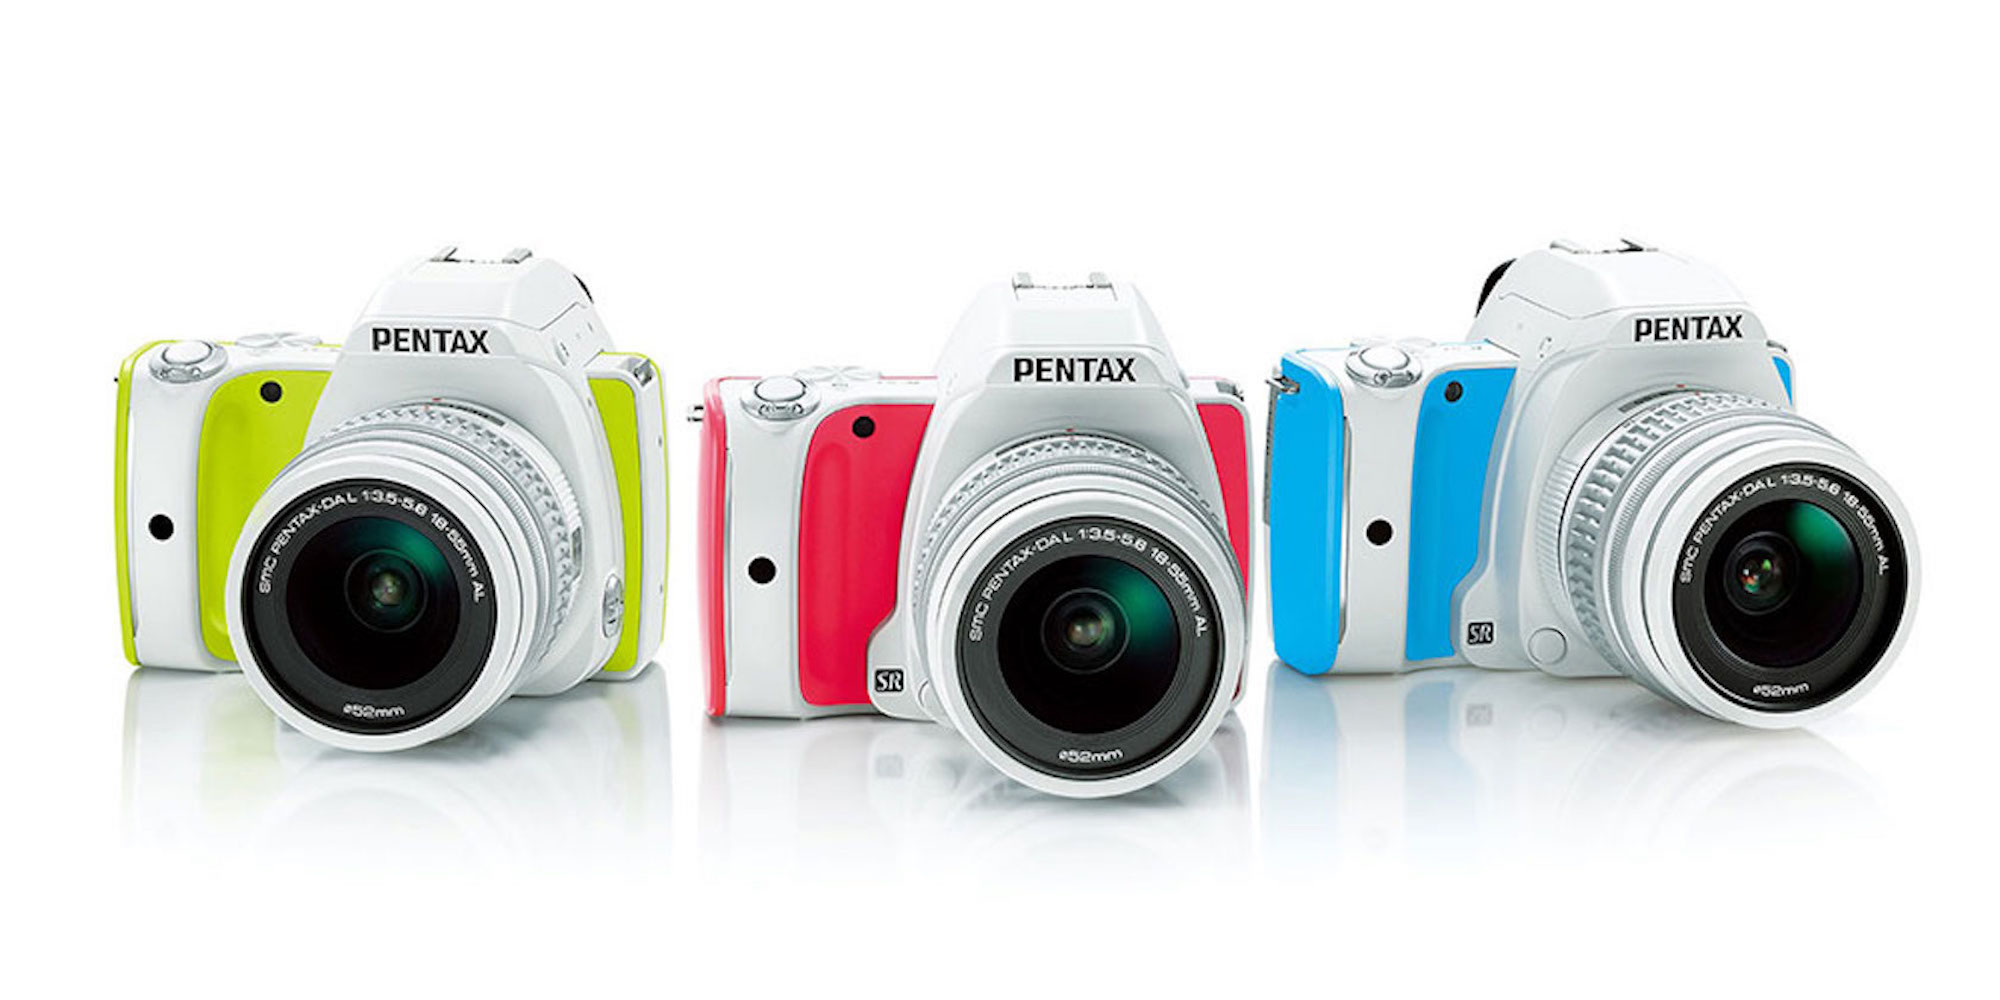 Pentax 20MP K-S1 DSLR with 18-55mm Lens + 16GB WiFi Memory Card